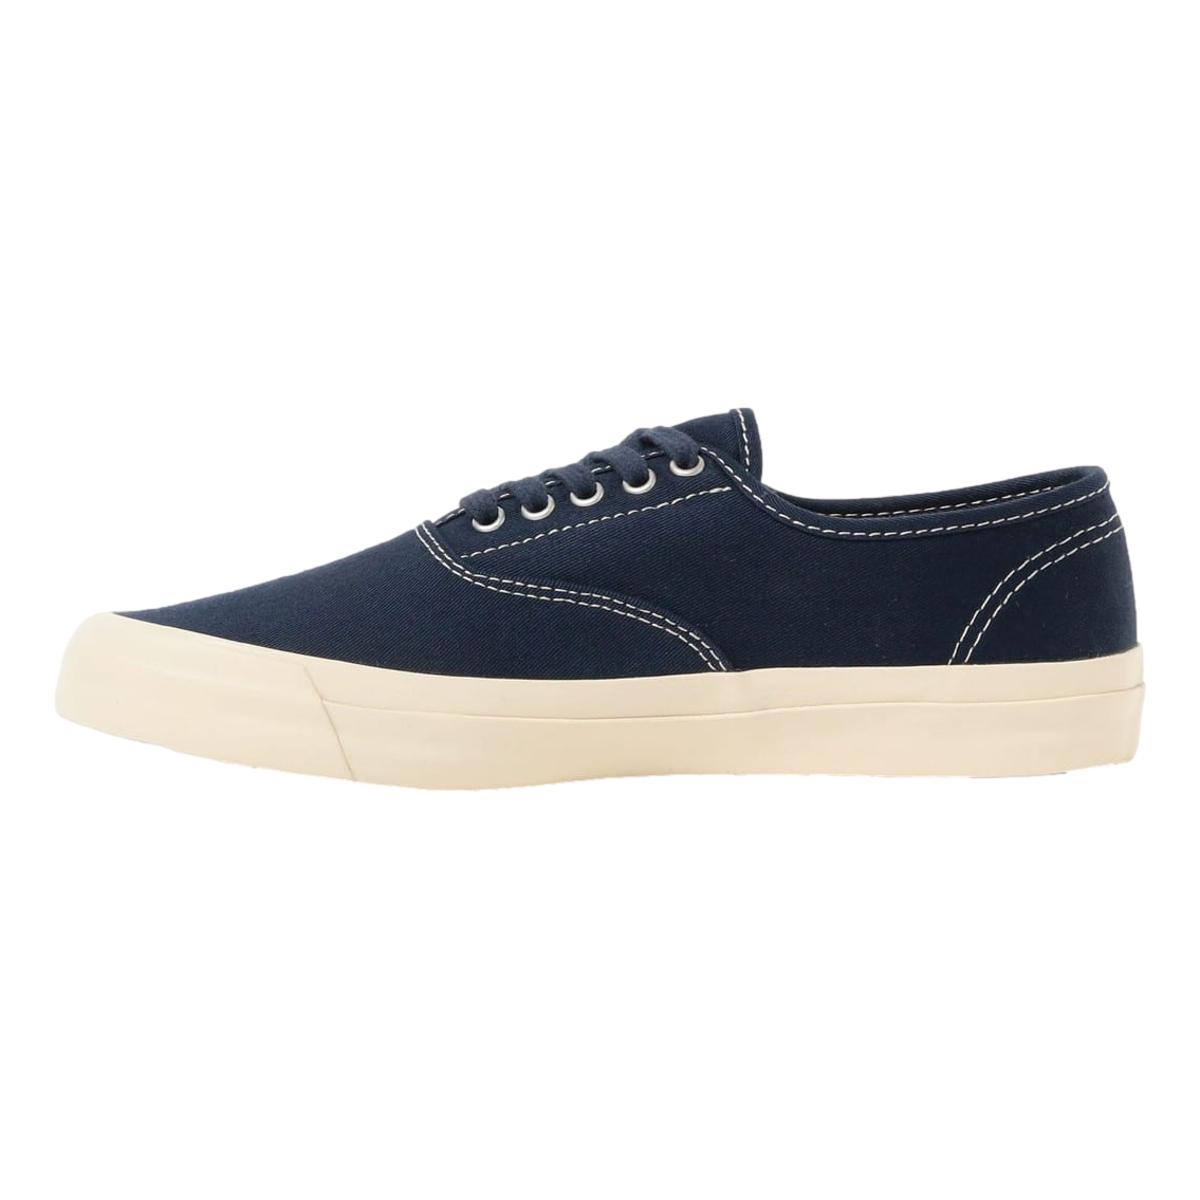 Beams Plus x Sperry Top Sider Deck Shoe Navy - Shoes